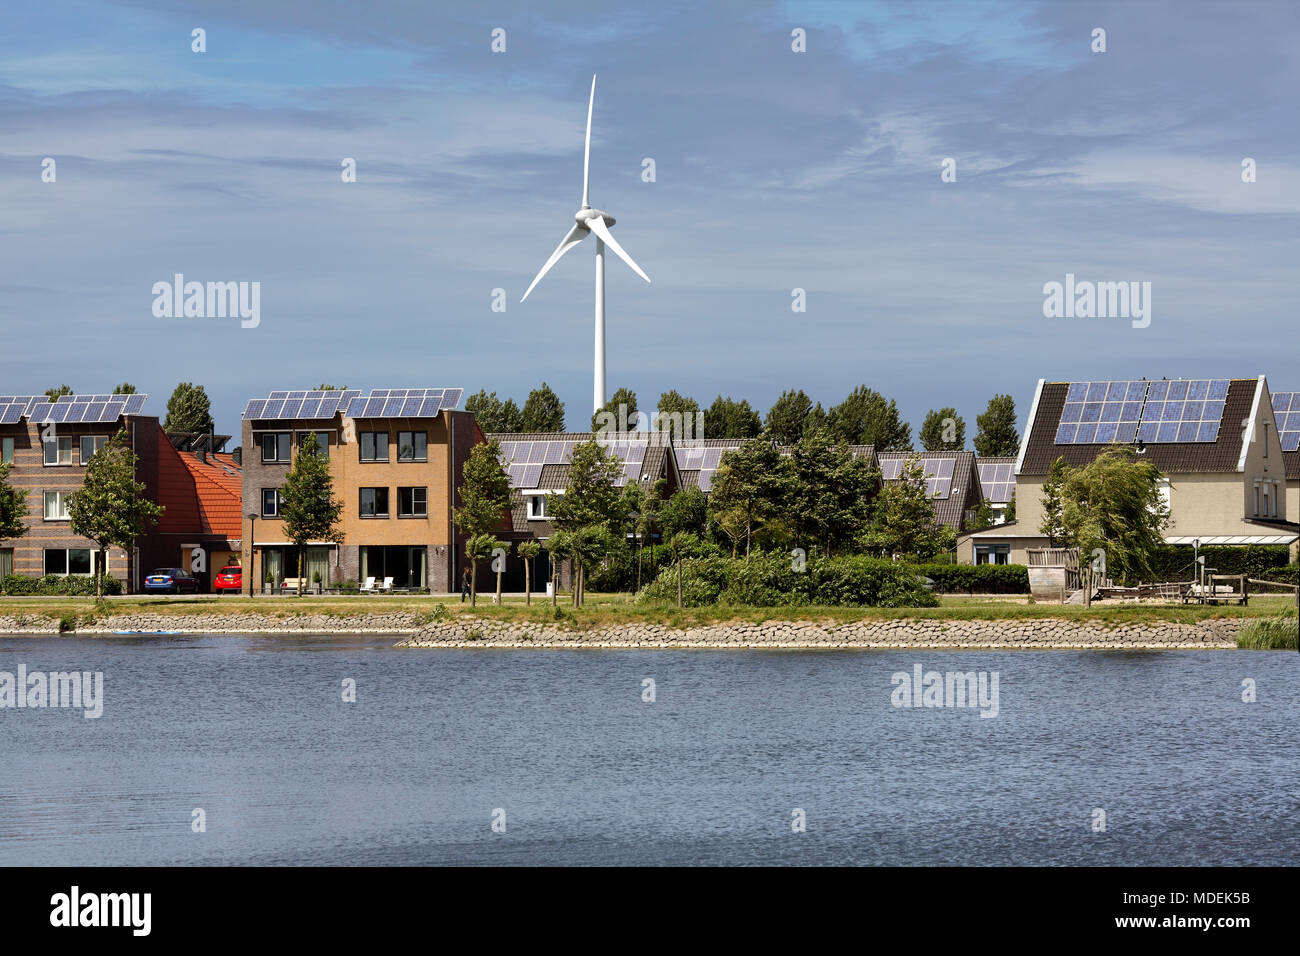 Houses topped with photovoltaic cells with a wind turbine behind in Stad van de Zon (City of the Sun), a sustainable suburb of Heerhugowaard, Holland. Stock Photo